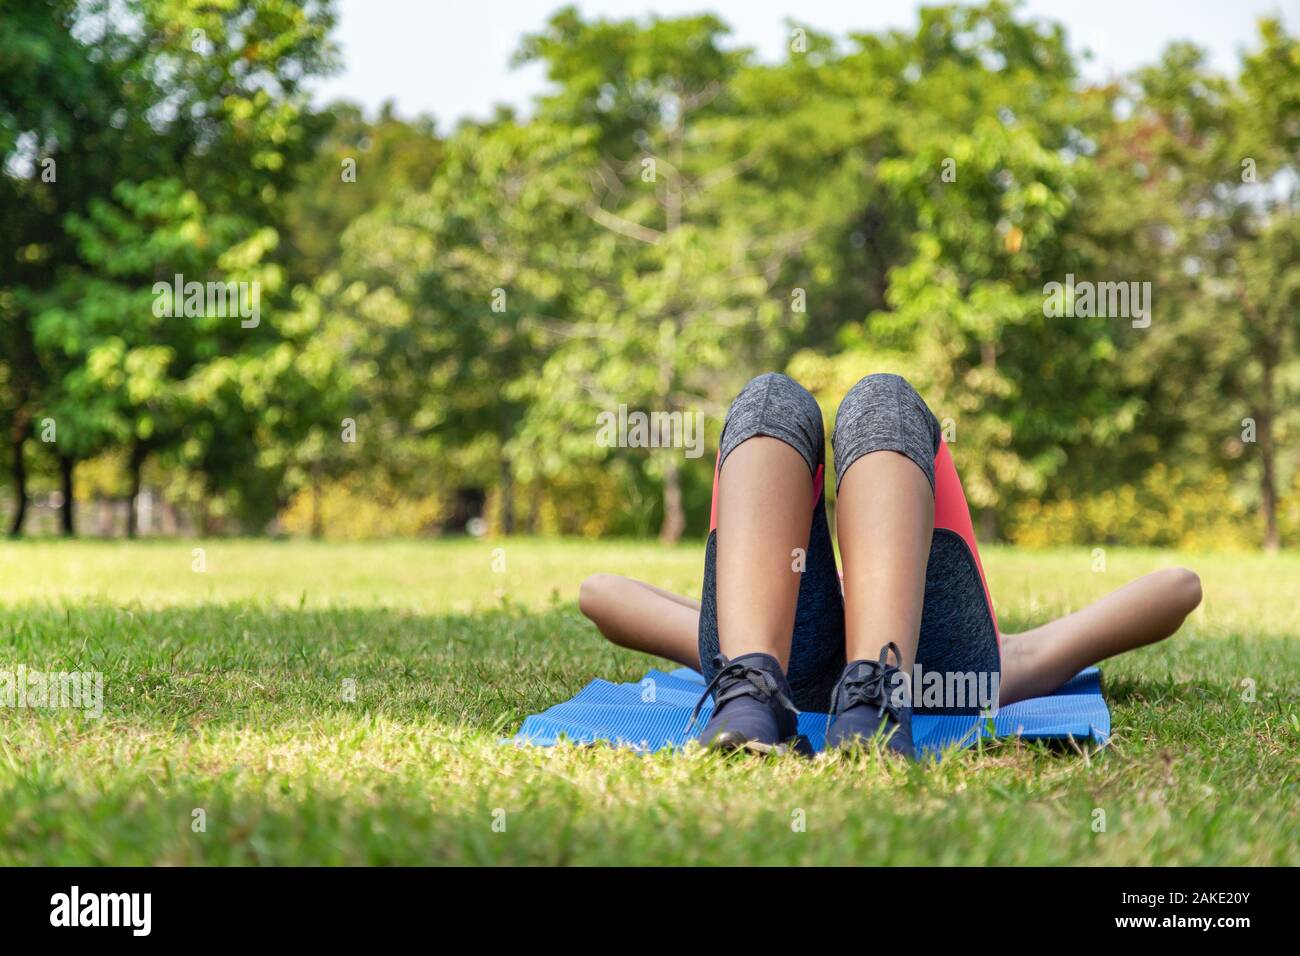 Legs of woman sitting in long grass in summer wearing brightly